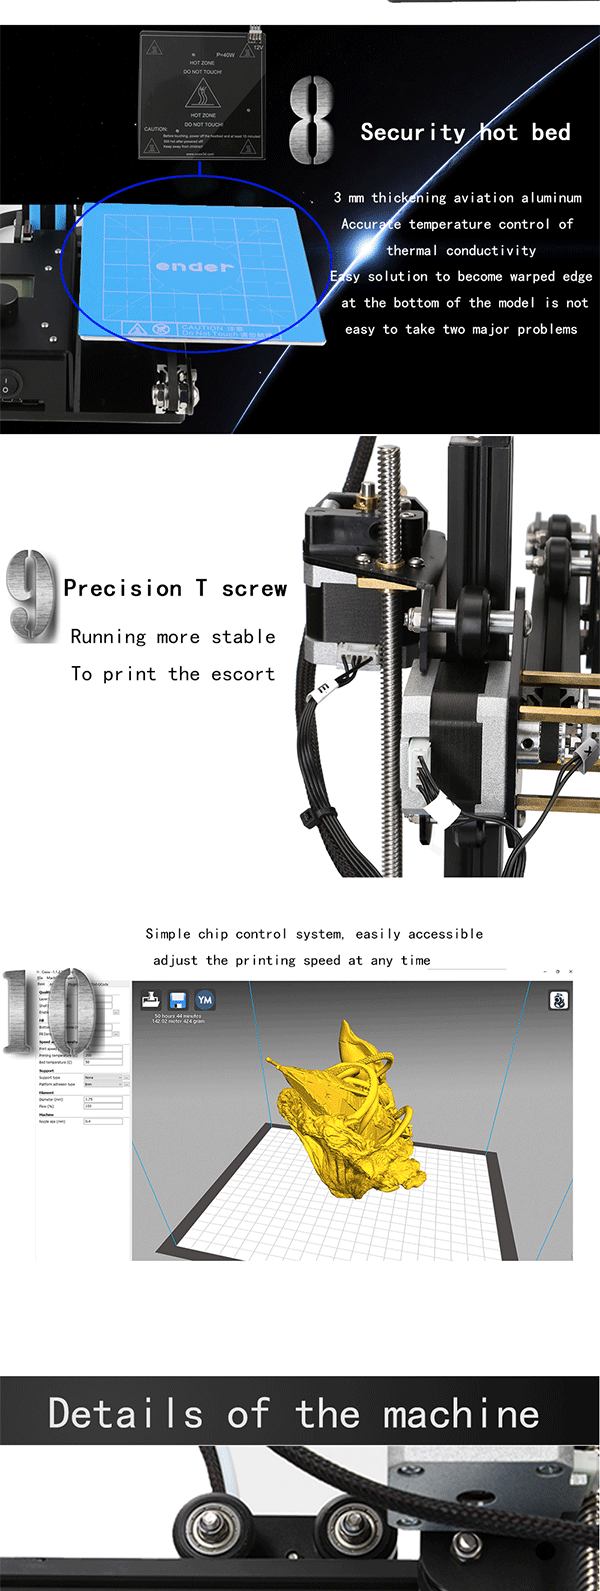 Creality 3D® Ender-2 DIY 3D Printer Kit 150*150*200mm Printing Size With Auto Leveling 1.75mm 0.4mm Nozzle 23